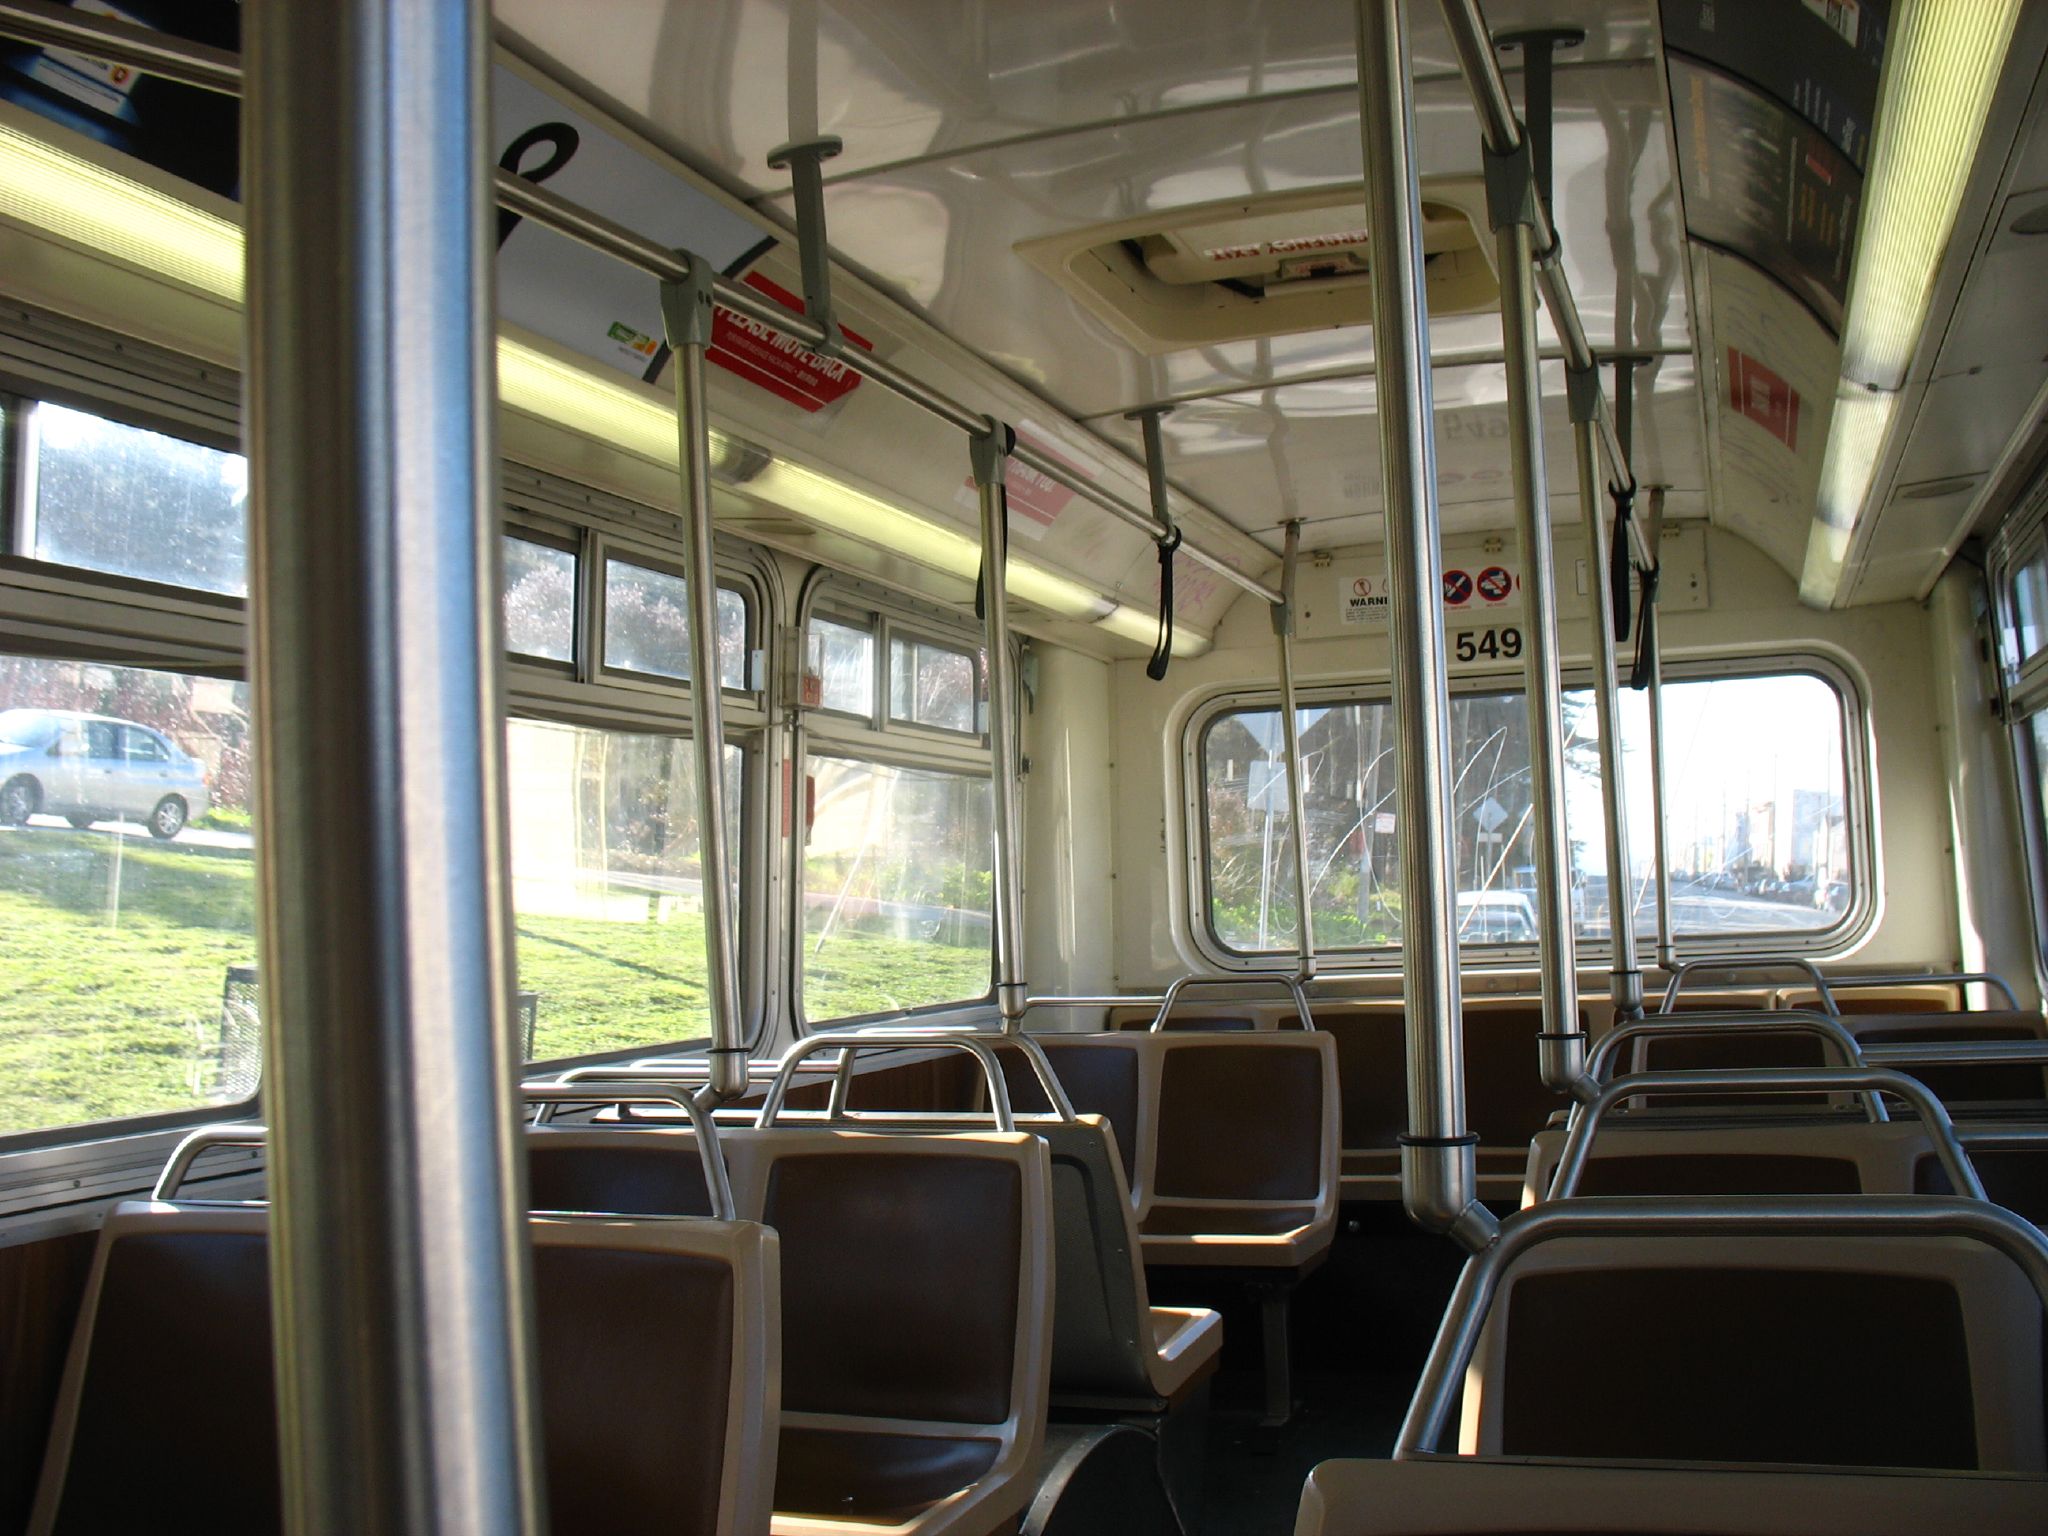 an empty commuter bus has many seats and windows